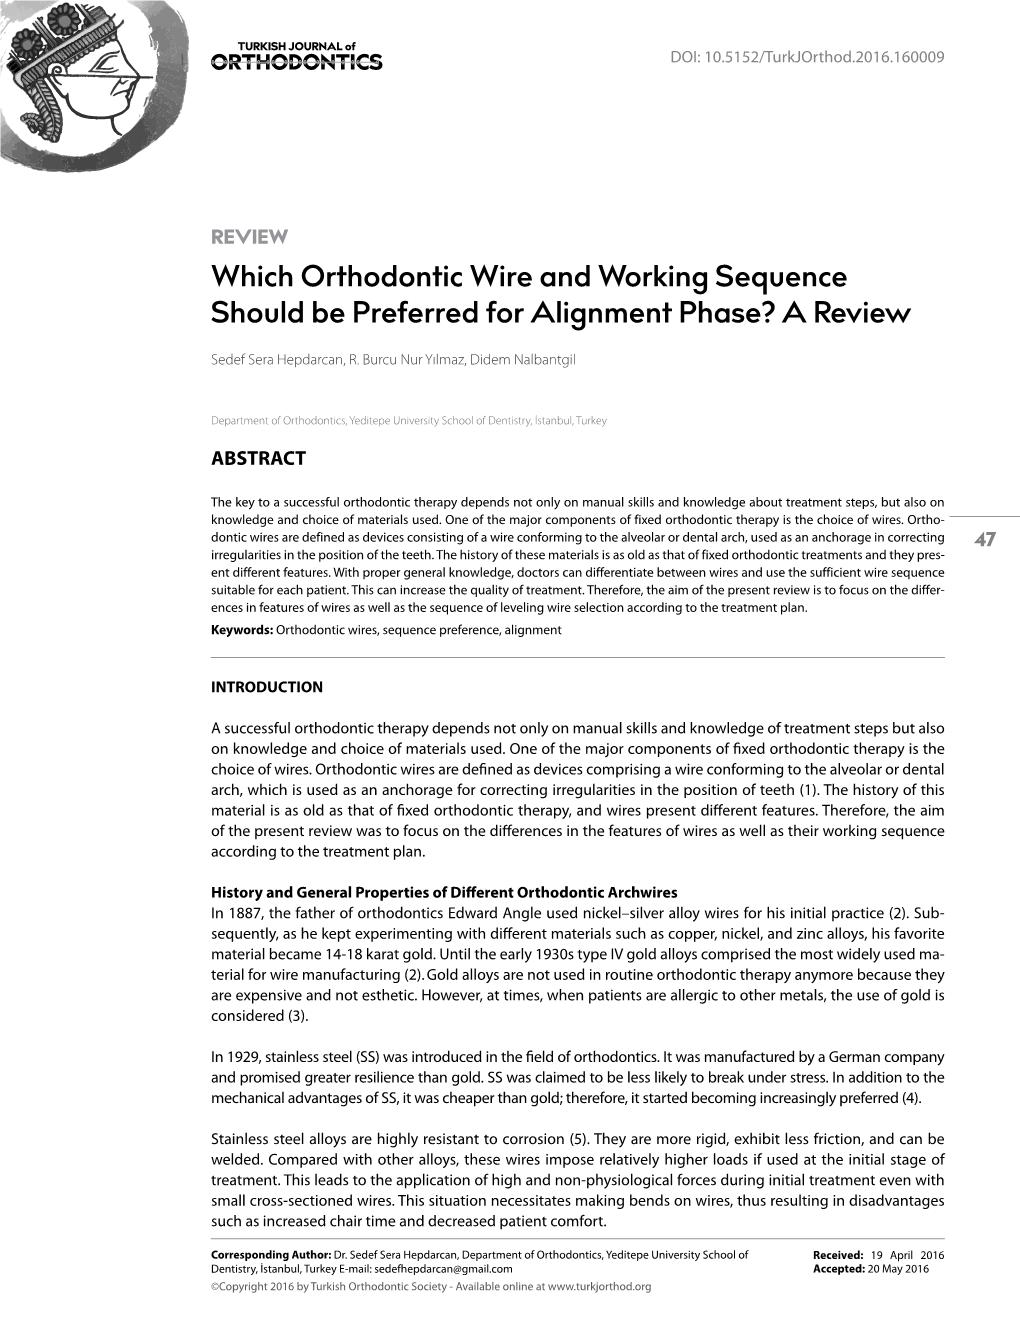 Which Orthodontic Wire and Working Sequence Should Be Preferred for Alignment Phase? a Review